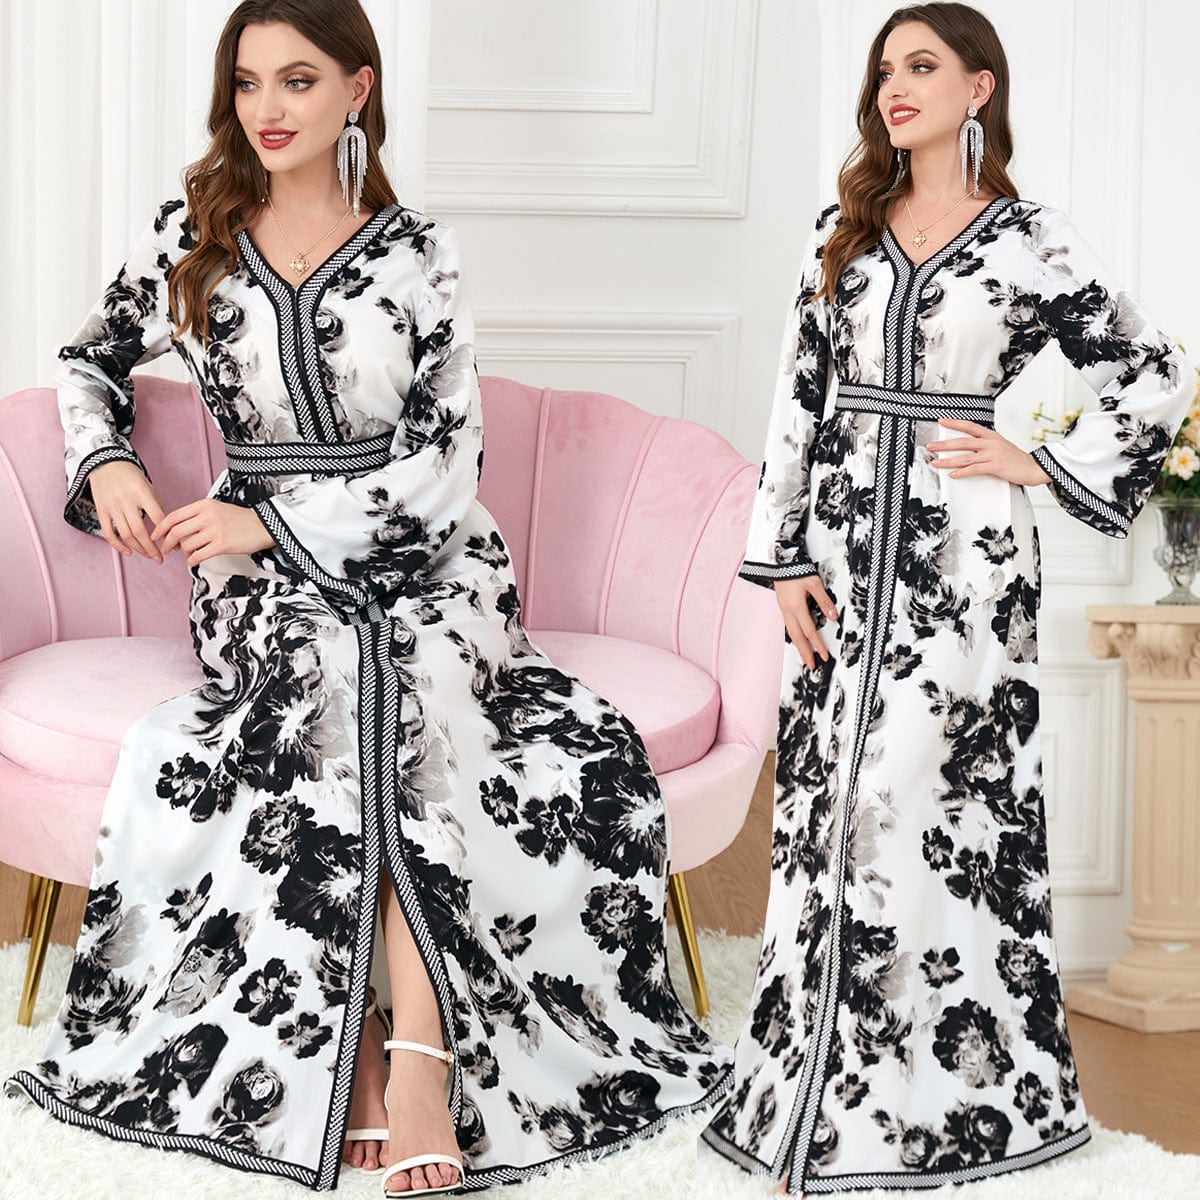 double views of a lady wearing ladies' robe with floral print